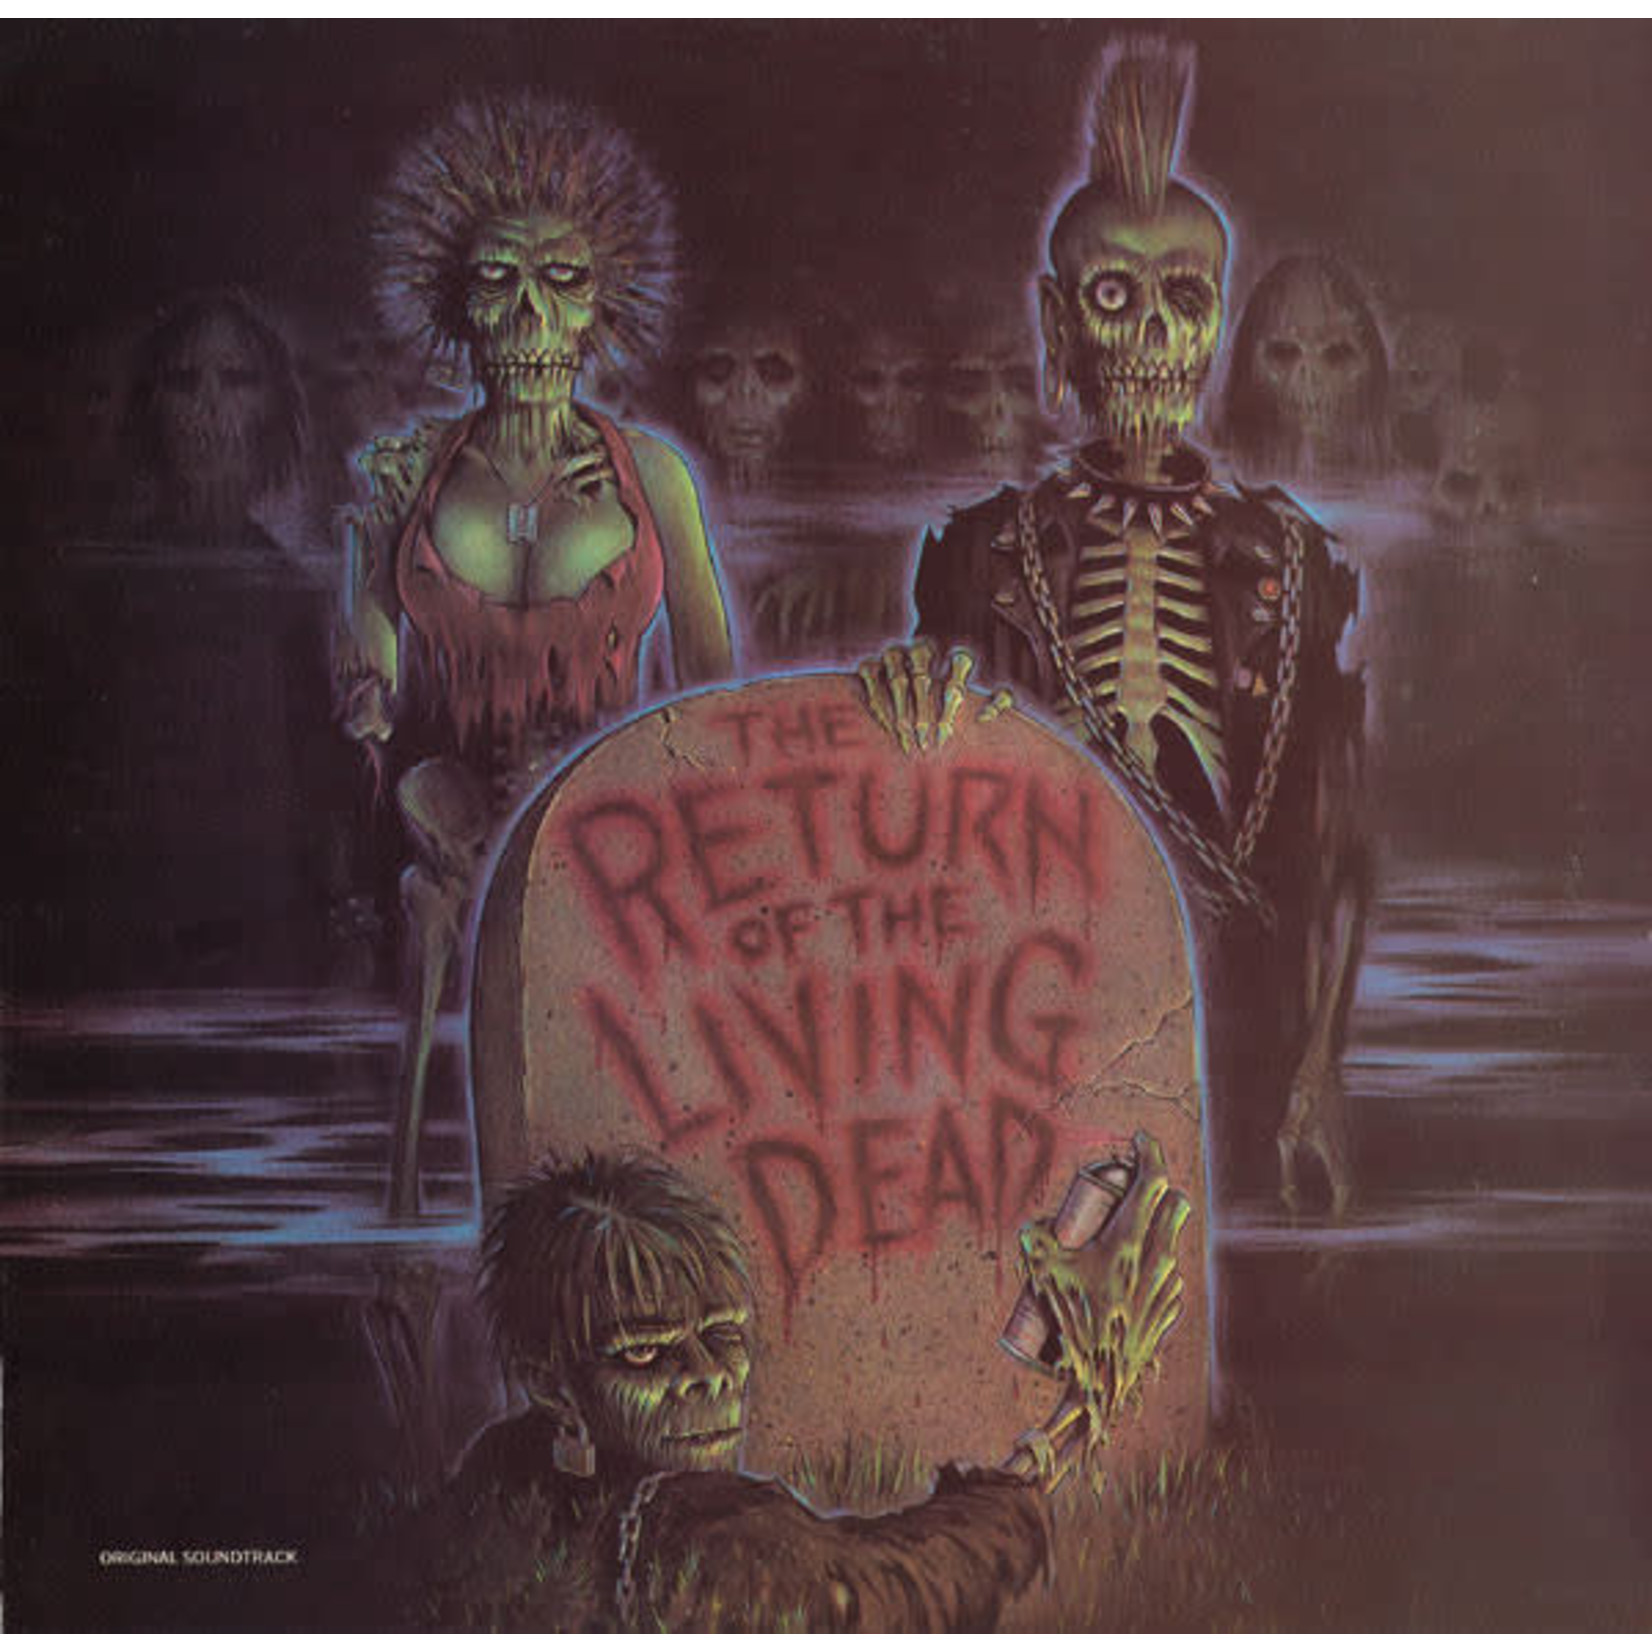 Various: The Return Of The Living Dead (Original Soundtrack) - '85 USA (LP, Cover VG/Media VG+) [KOLLECTIBLES]